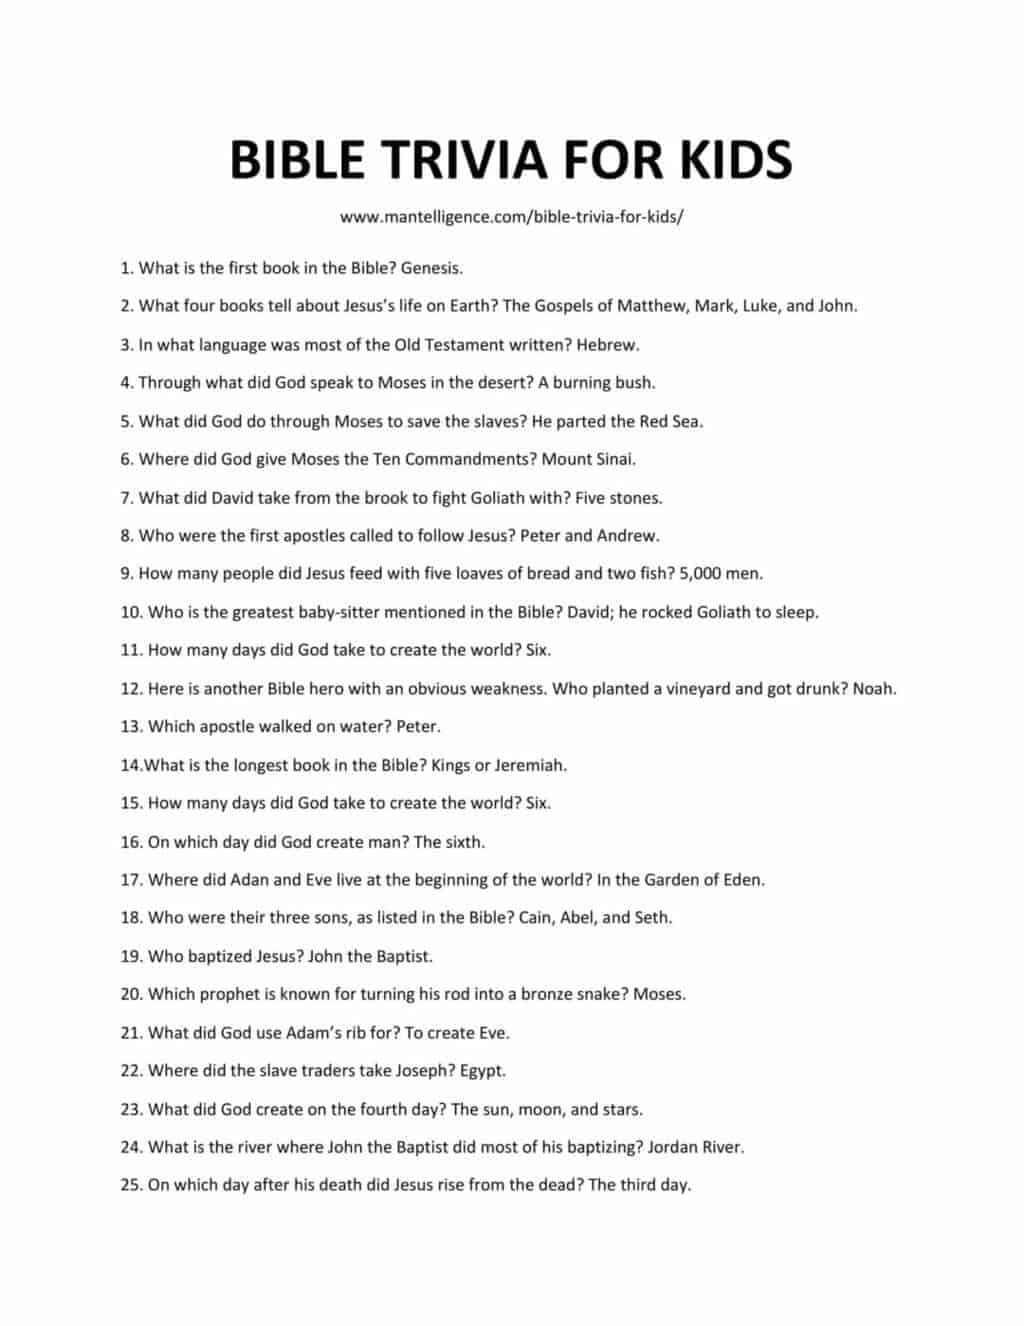 Bible Trivia For Kids Printable With Answers